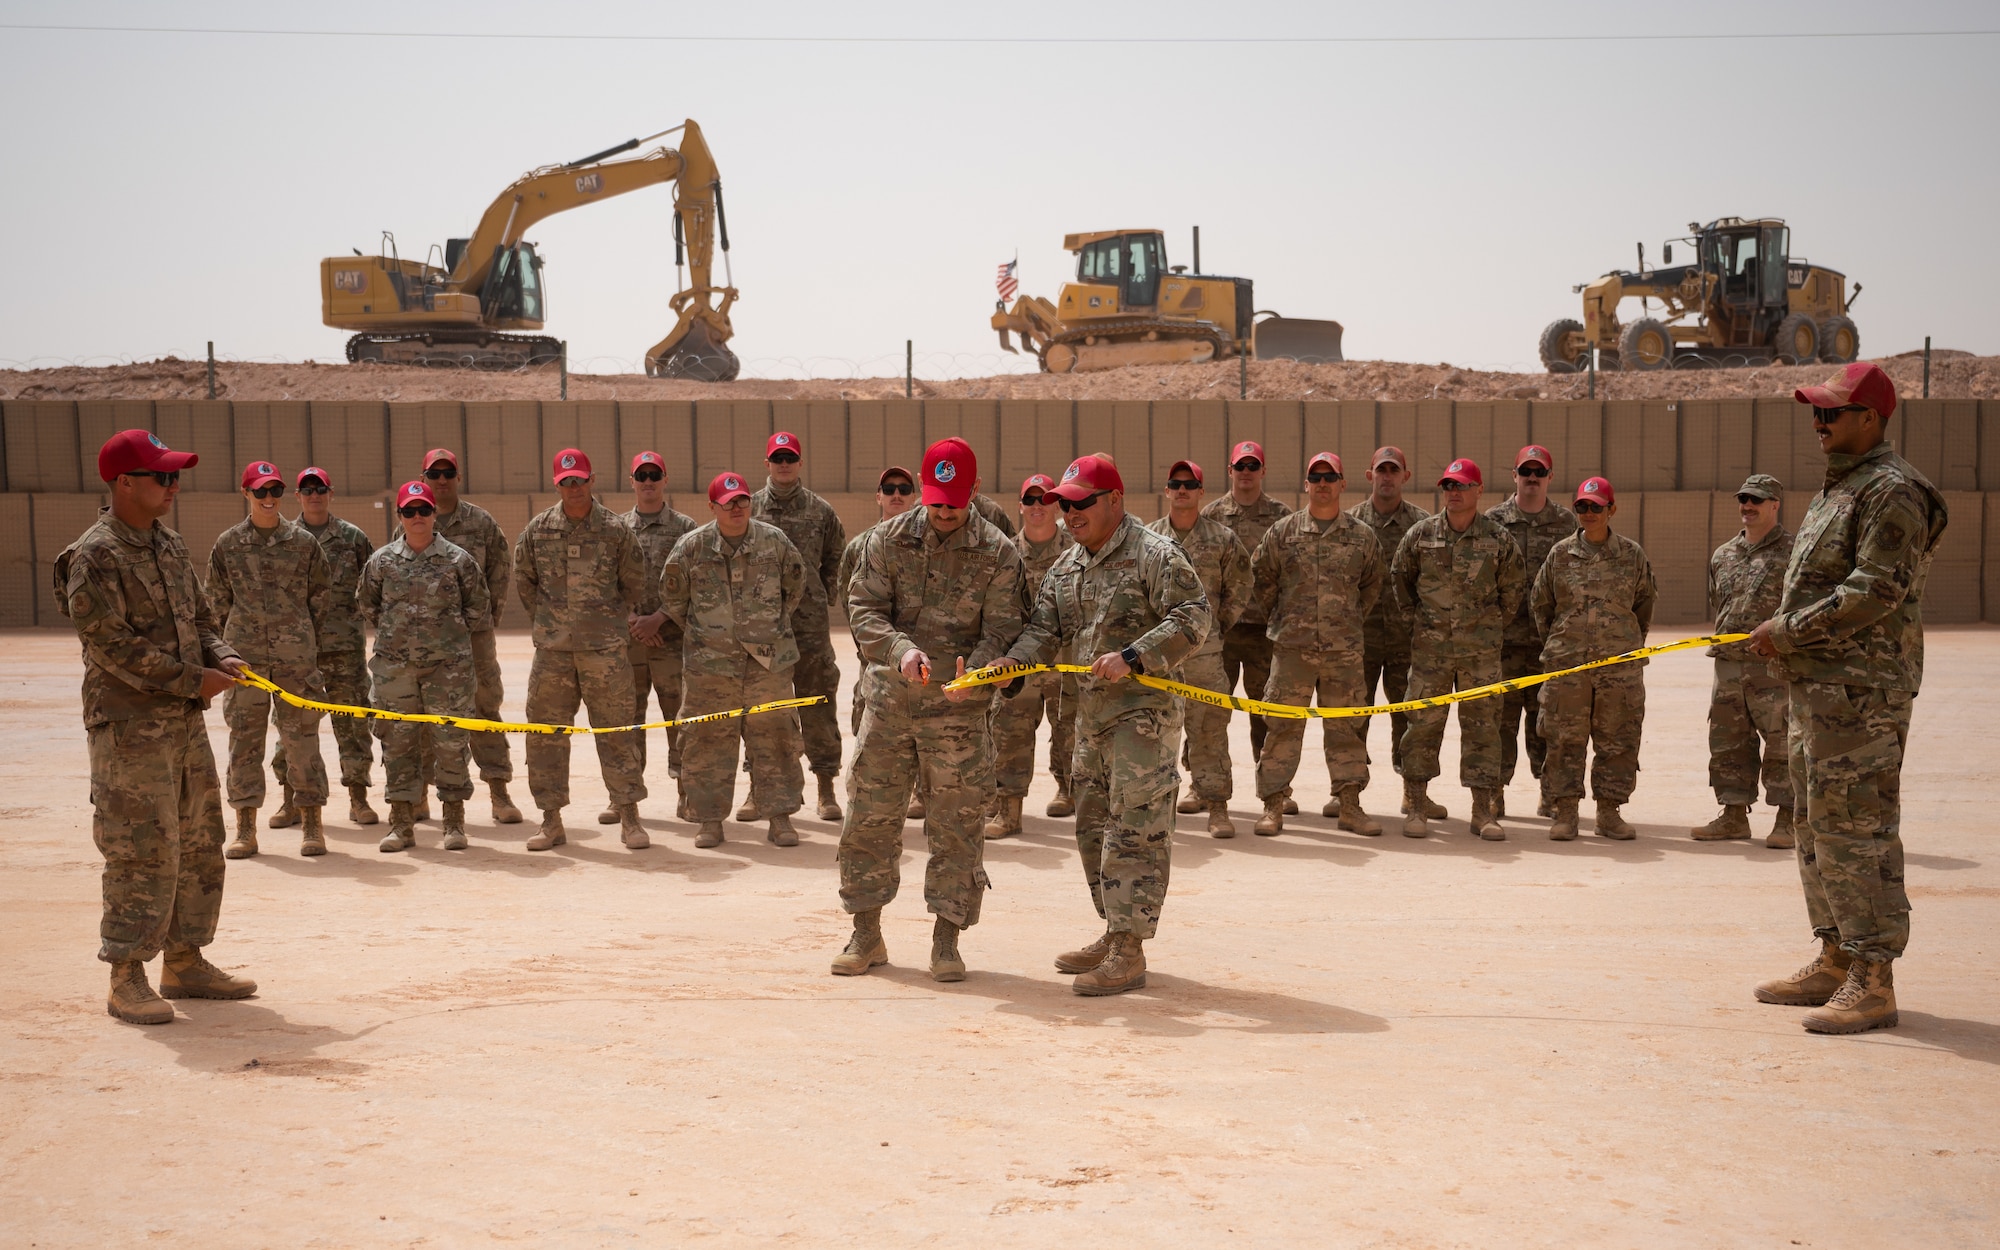 Brig. Gen. Robert Davis, 378th Air Expeditionary Wing commander, and Airmen of the 557th Expeditionary Red Horse Squadron participate in a ribbon cutting ceremony at Prince Sultan Air Base, Kingdom of Saudi Arabia, March 16, 2022. The ribbon cutting ceremony was held to celebrate the expansion of PSAB's munition storage area. (U.S. Air Force photo by Senior Airman Jacob B. Wrightsman)